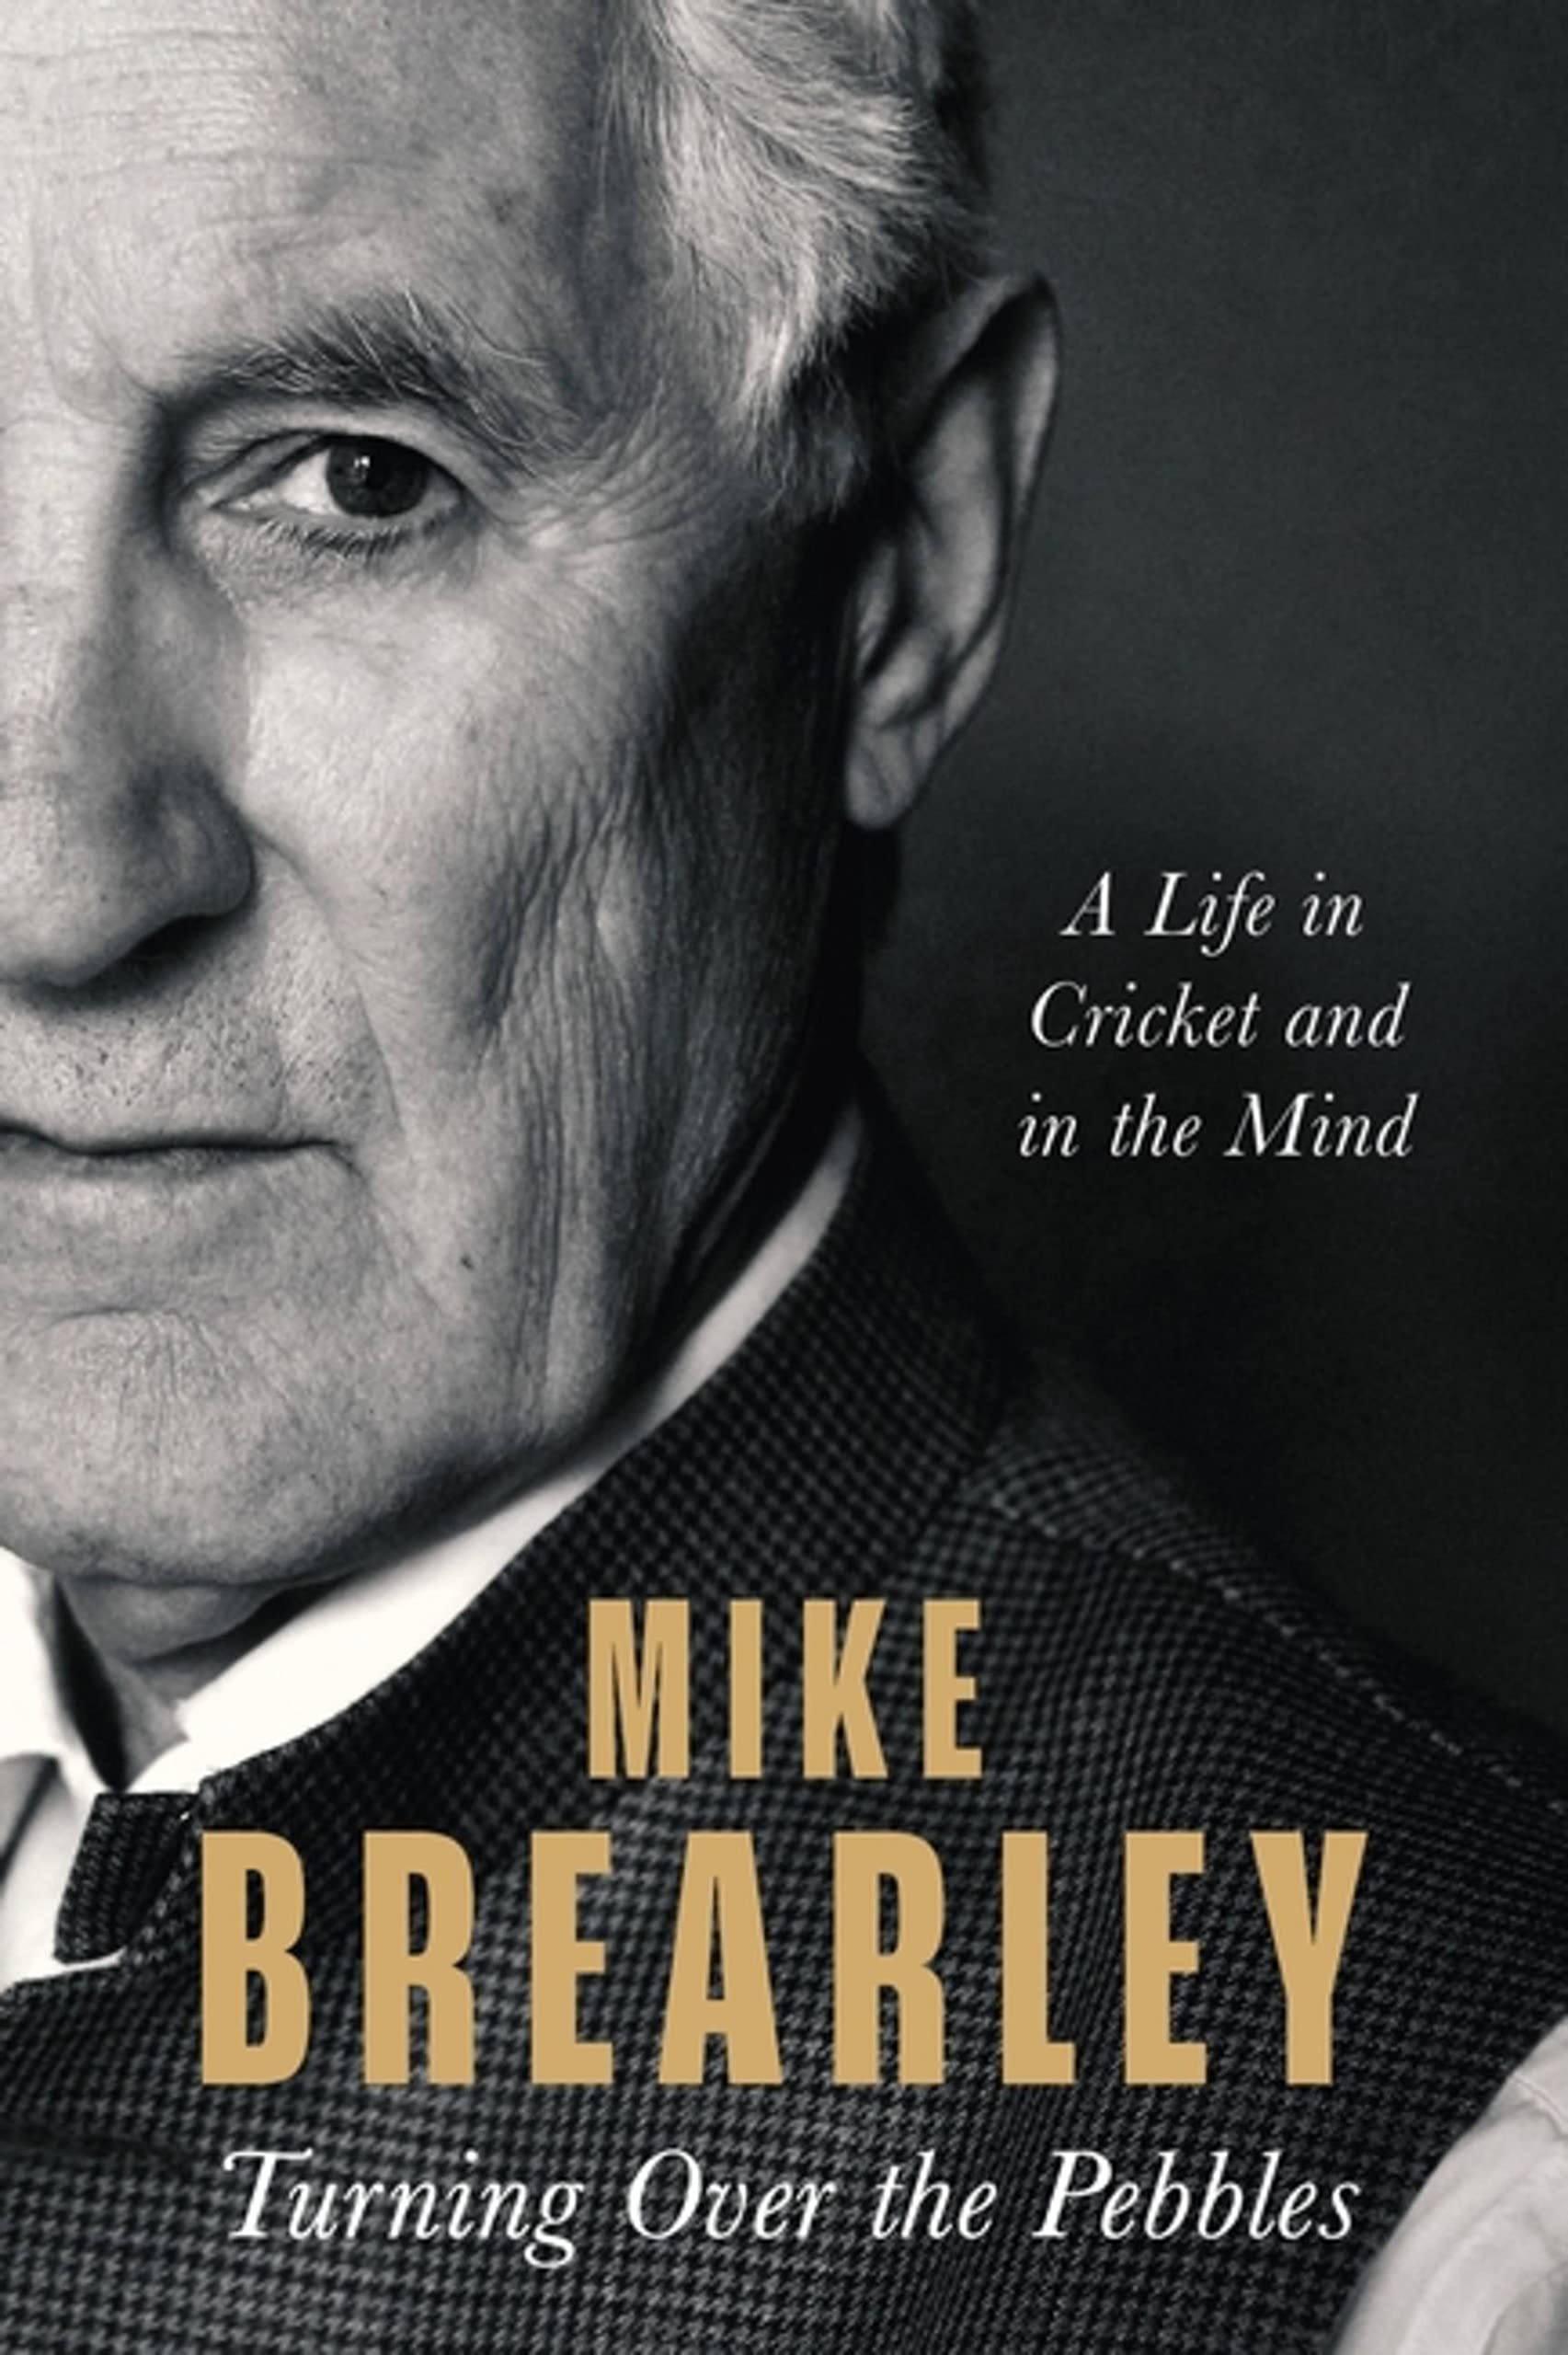 A_life_in_cricket_and_in_the_mind_Mike_Brearley_Turning_over_the_Pebbles